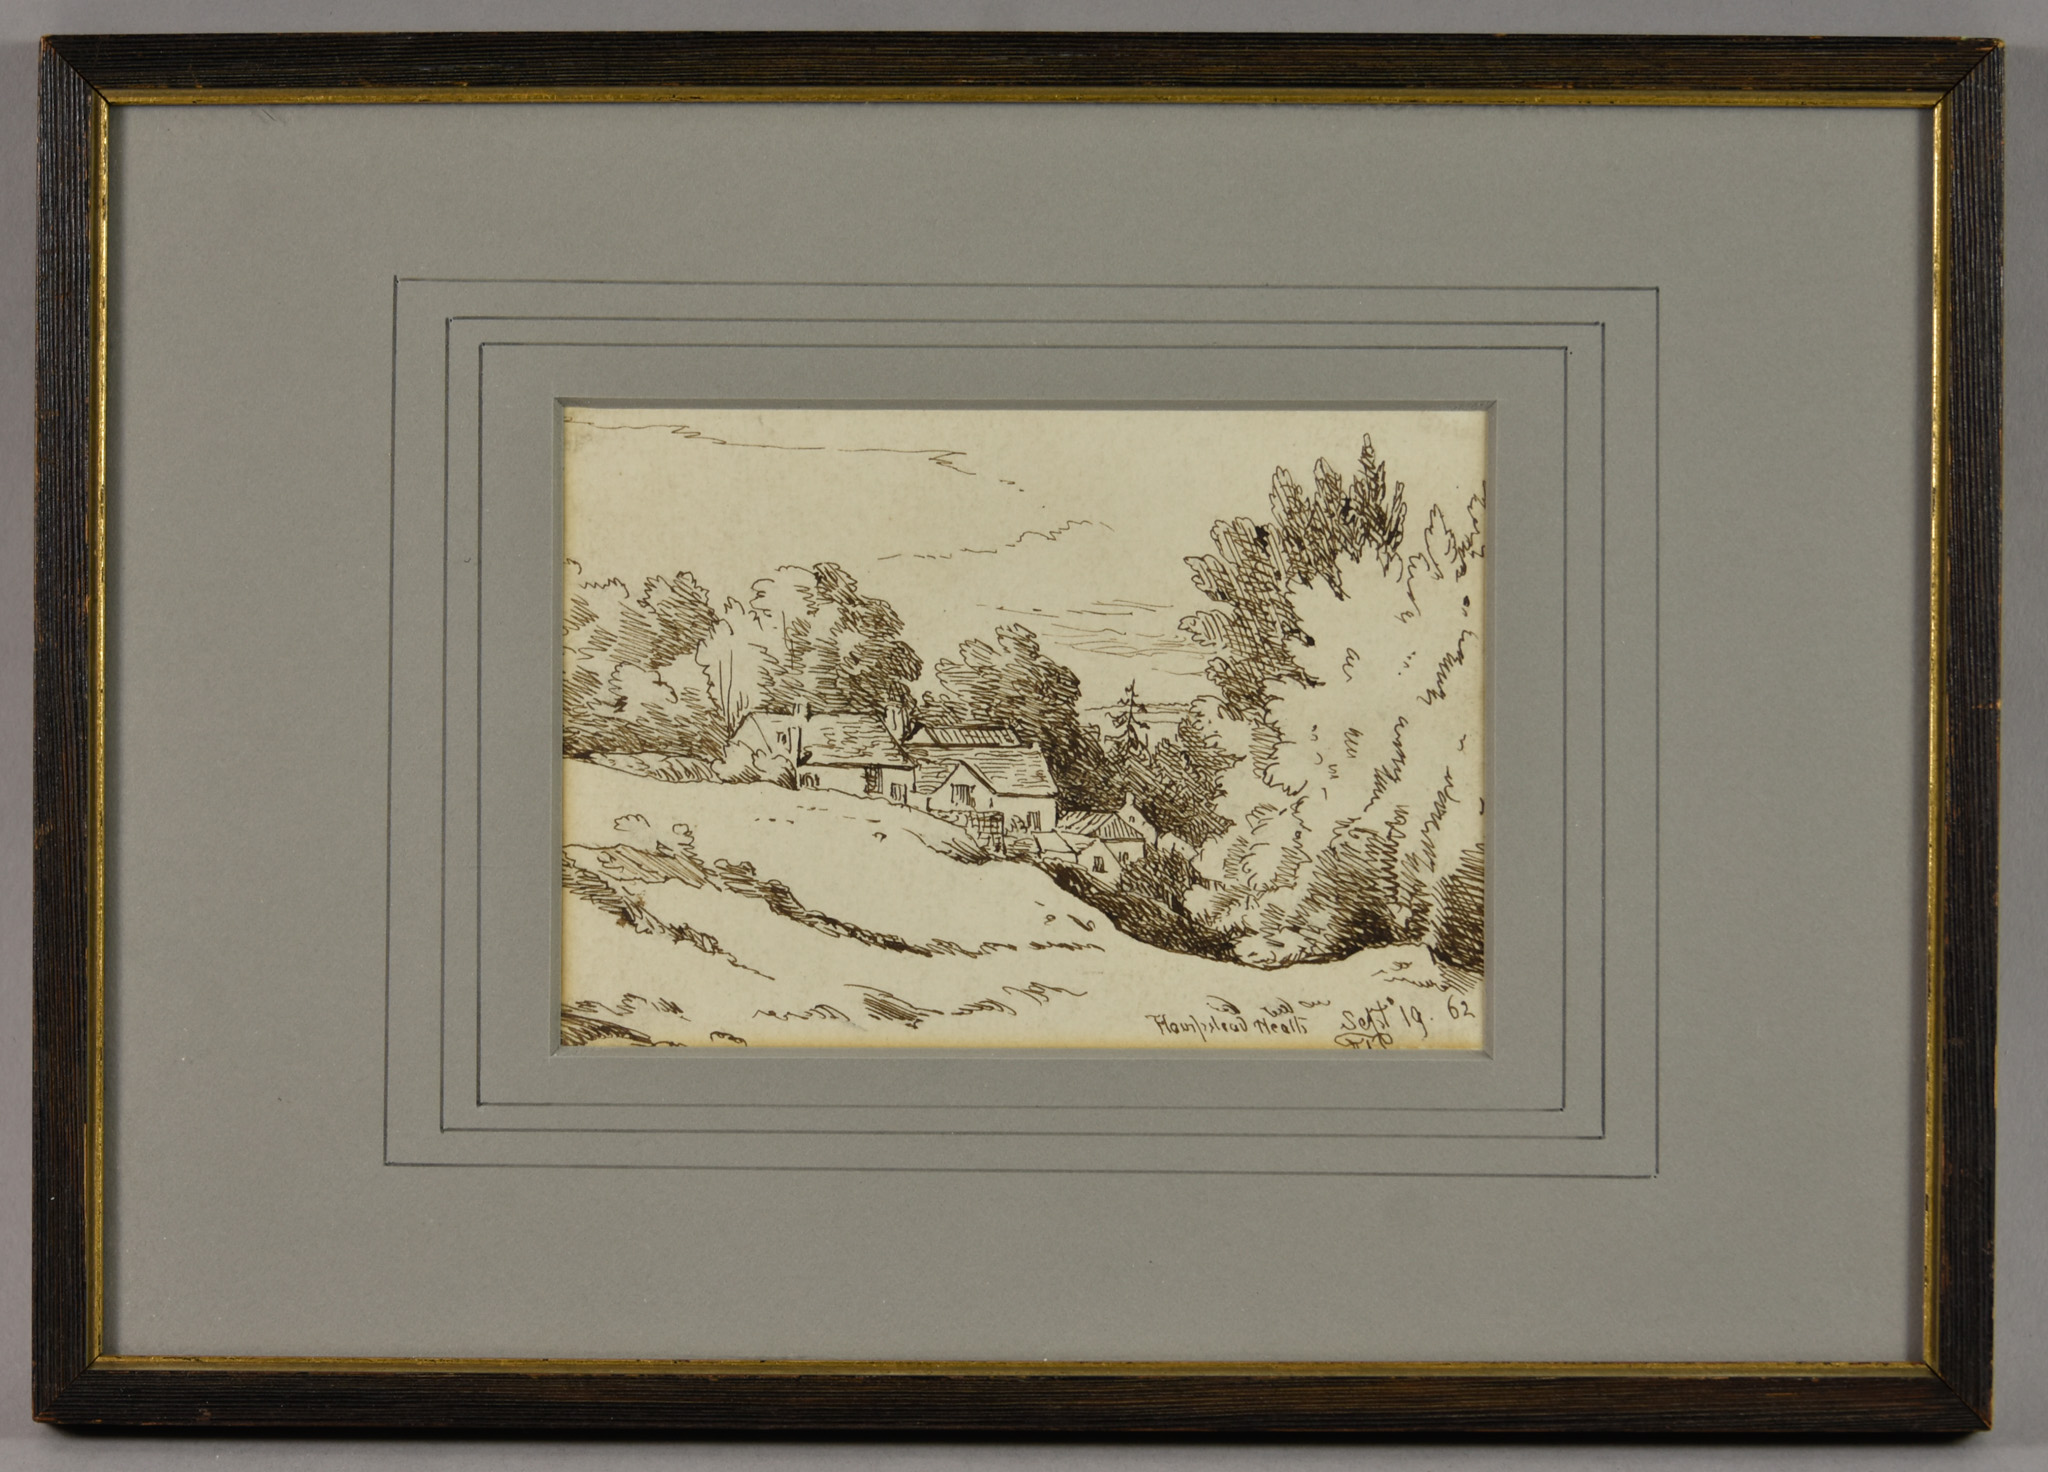 19th Century English School - Pen drawing – “Hampstead Heath”, 3.5ins x 5.25ins, titled, dated, Sept - Image 6 of 6